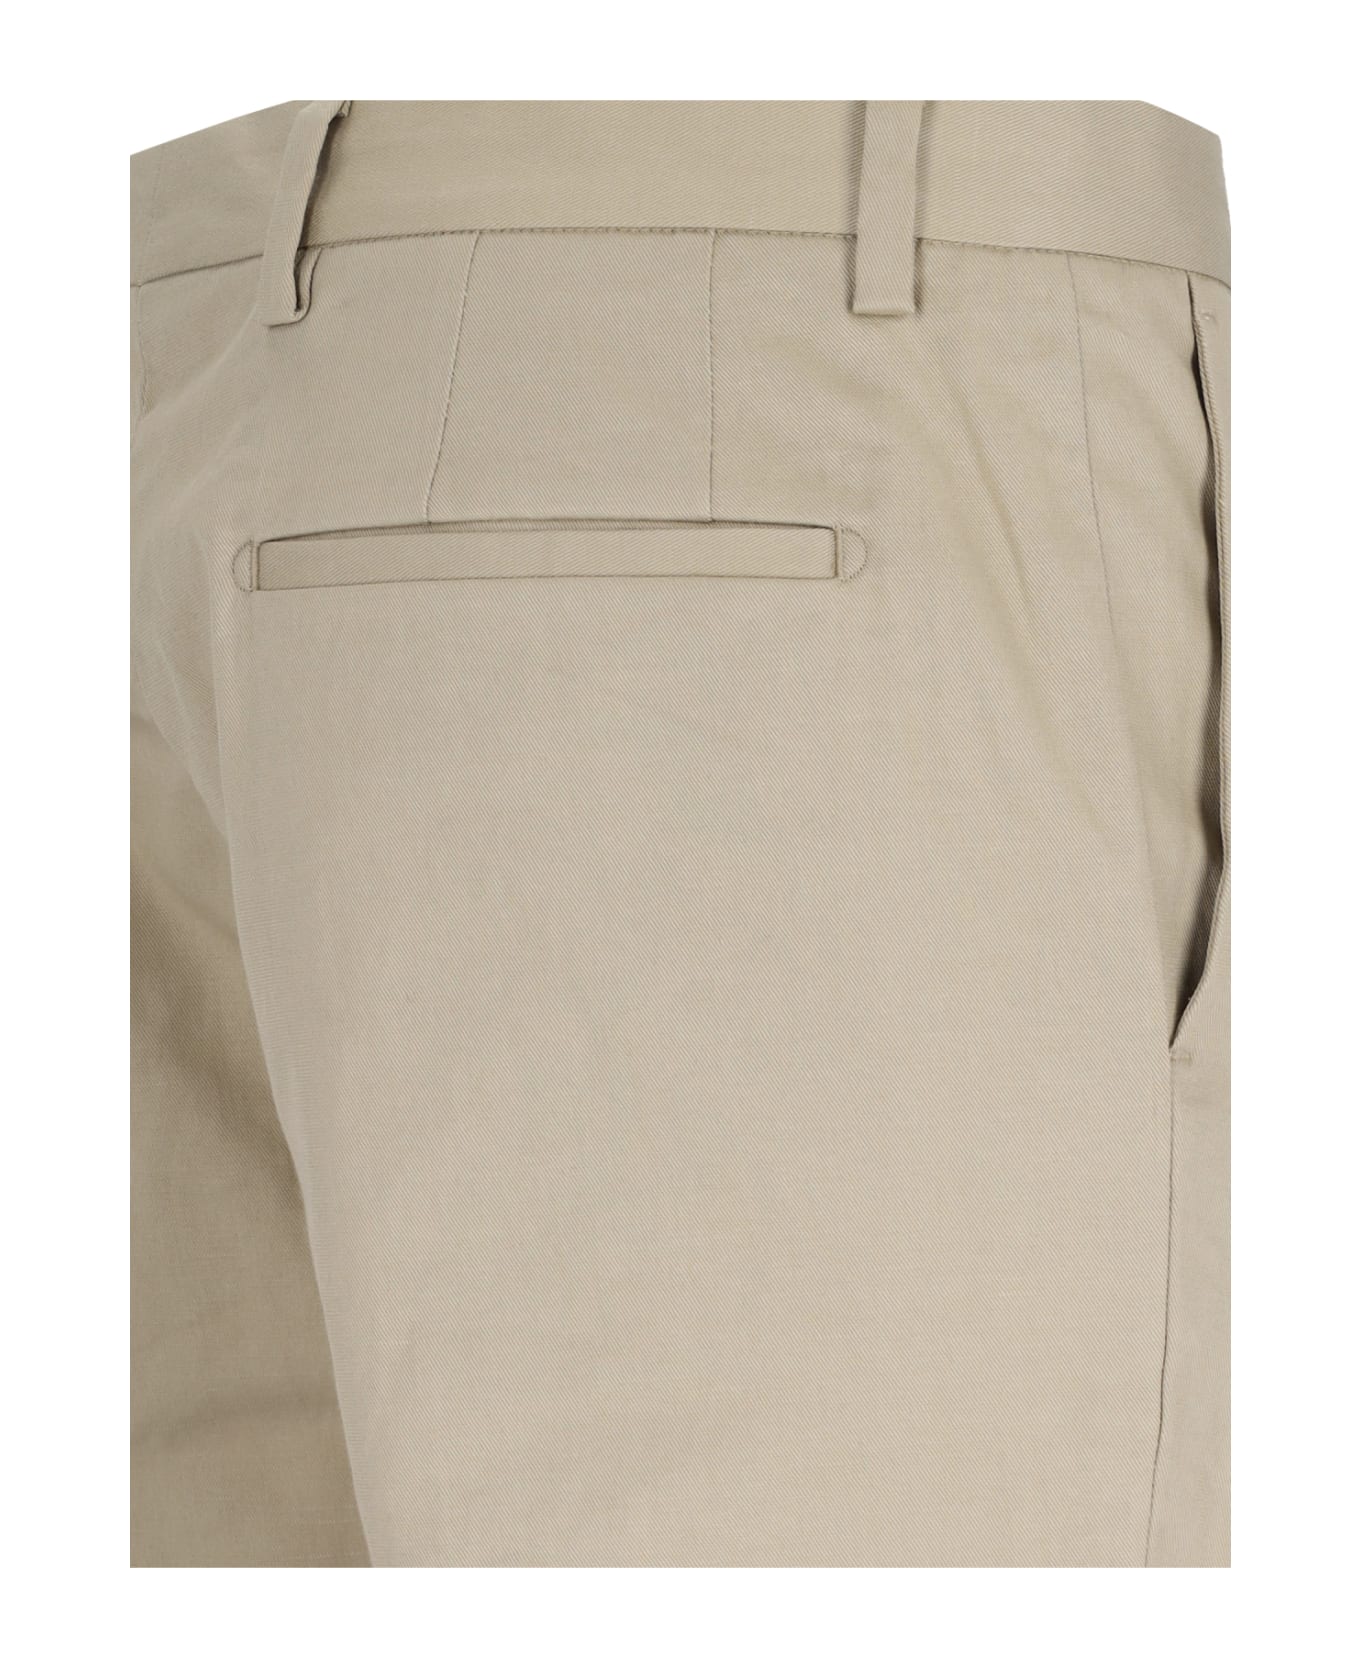 Paul Smith Chinos - Beige